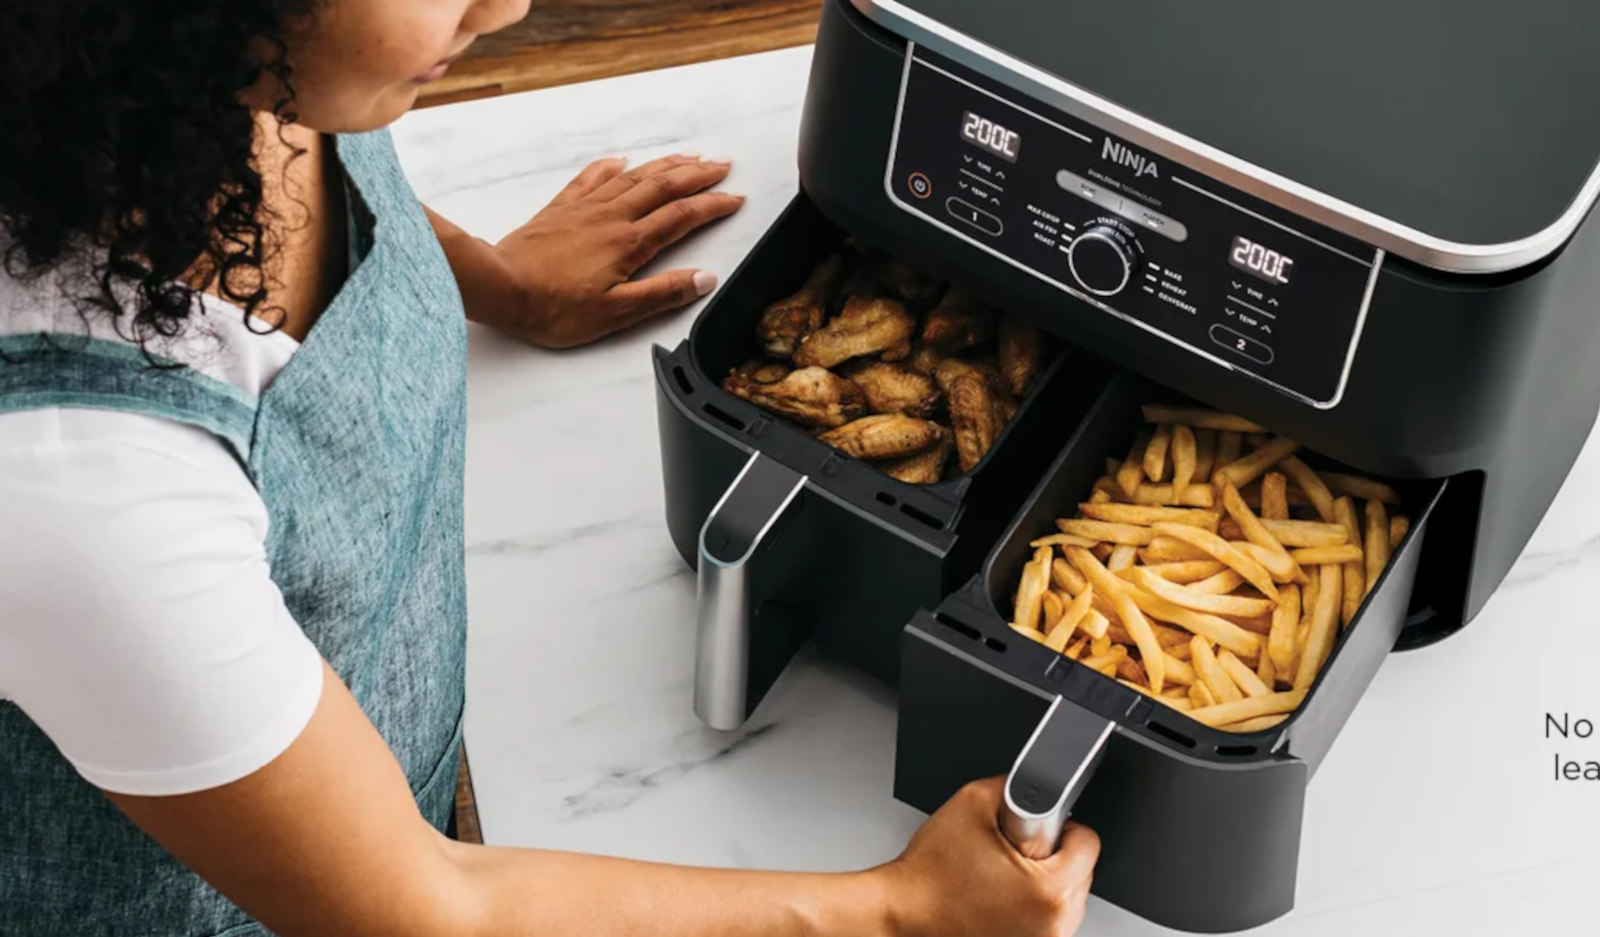 Shop air fryers, blenders, food processors, multi-cookers and more today with Ninja